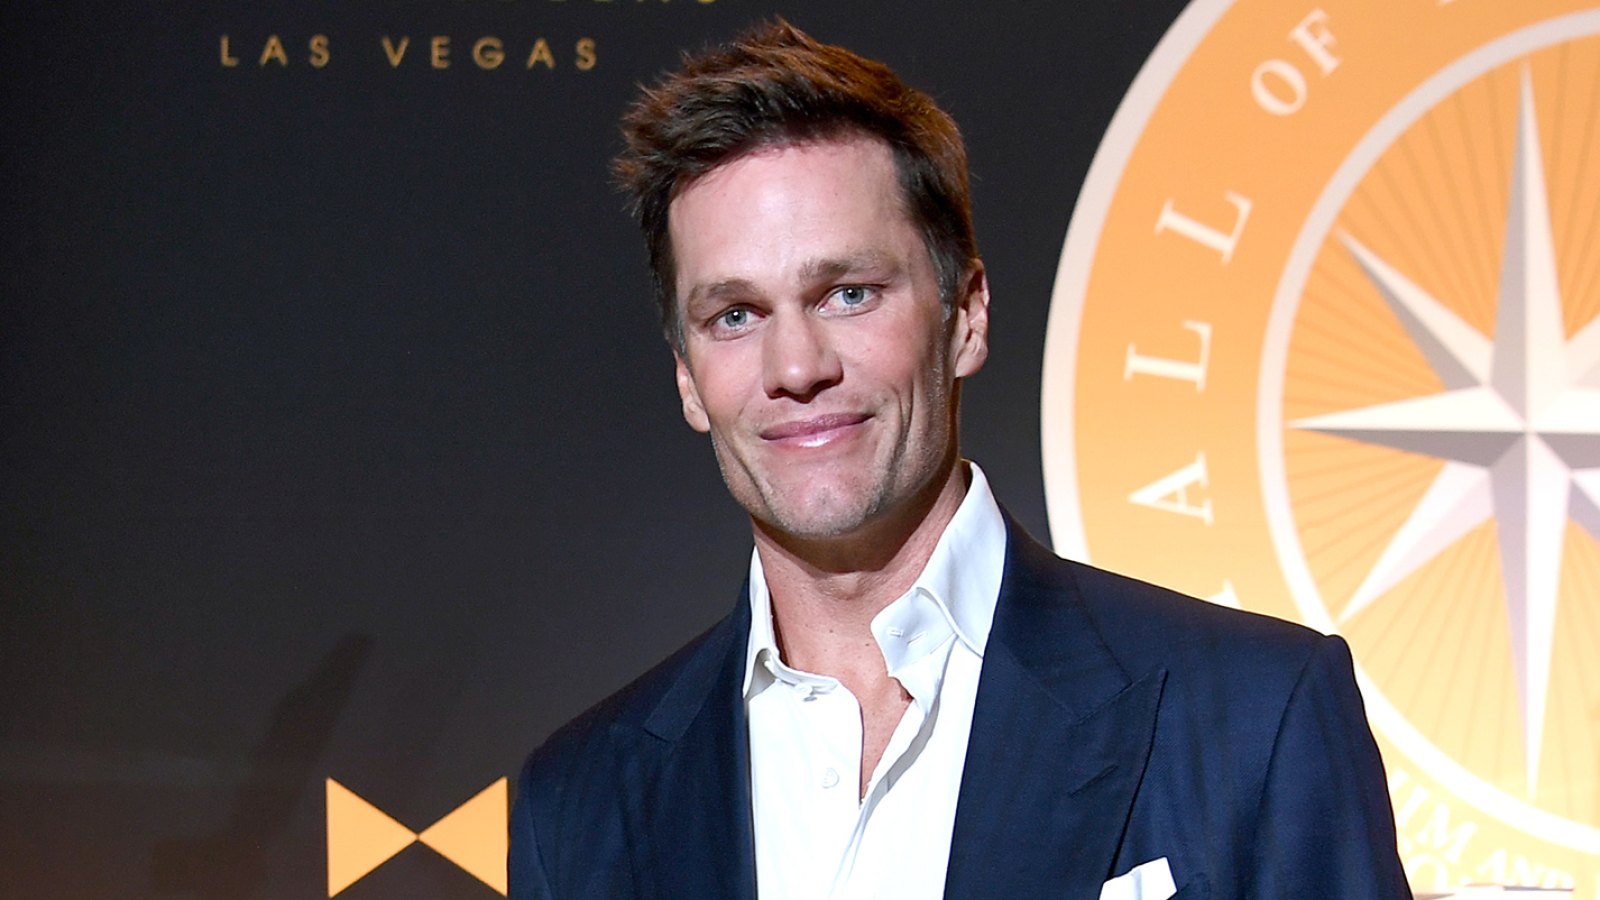 Tom Brady Is Leaving His 7 Super Bowl Rings in Las Vegas’ Hall of Excellence